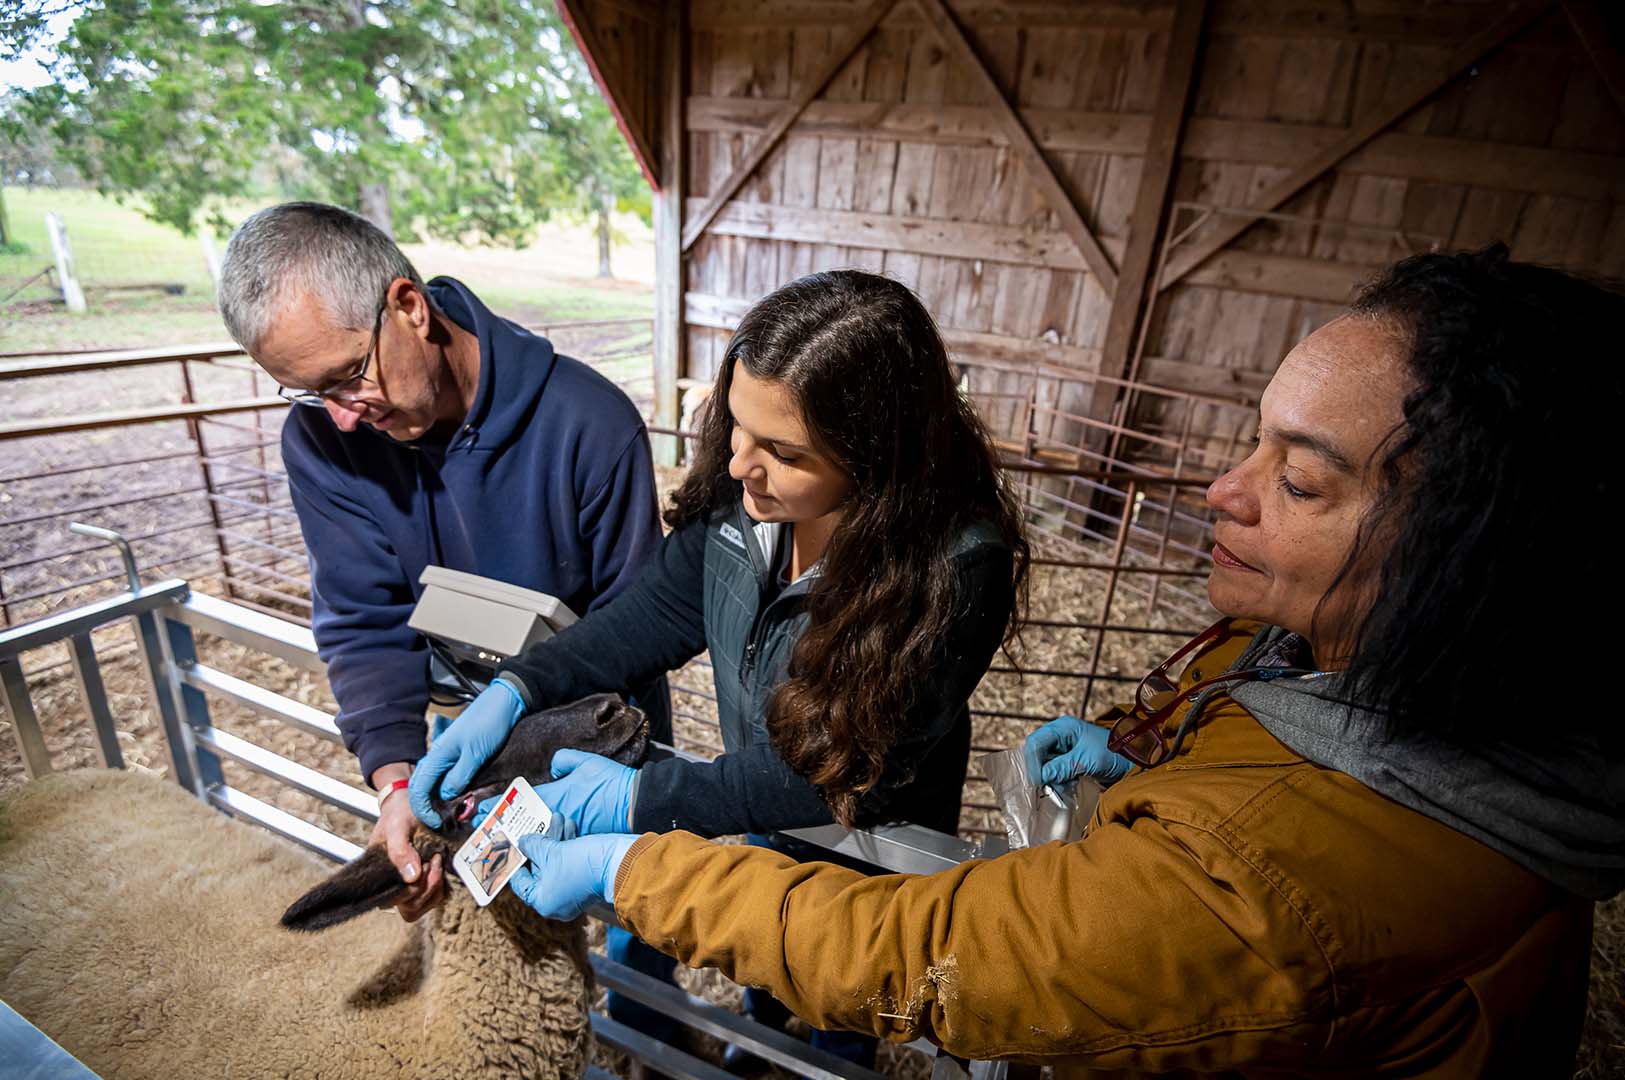 Opposite: Brad Gilmore, Lindsey Dearborn, and Leyla Rios examine a sheep at Gilmore